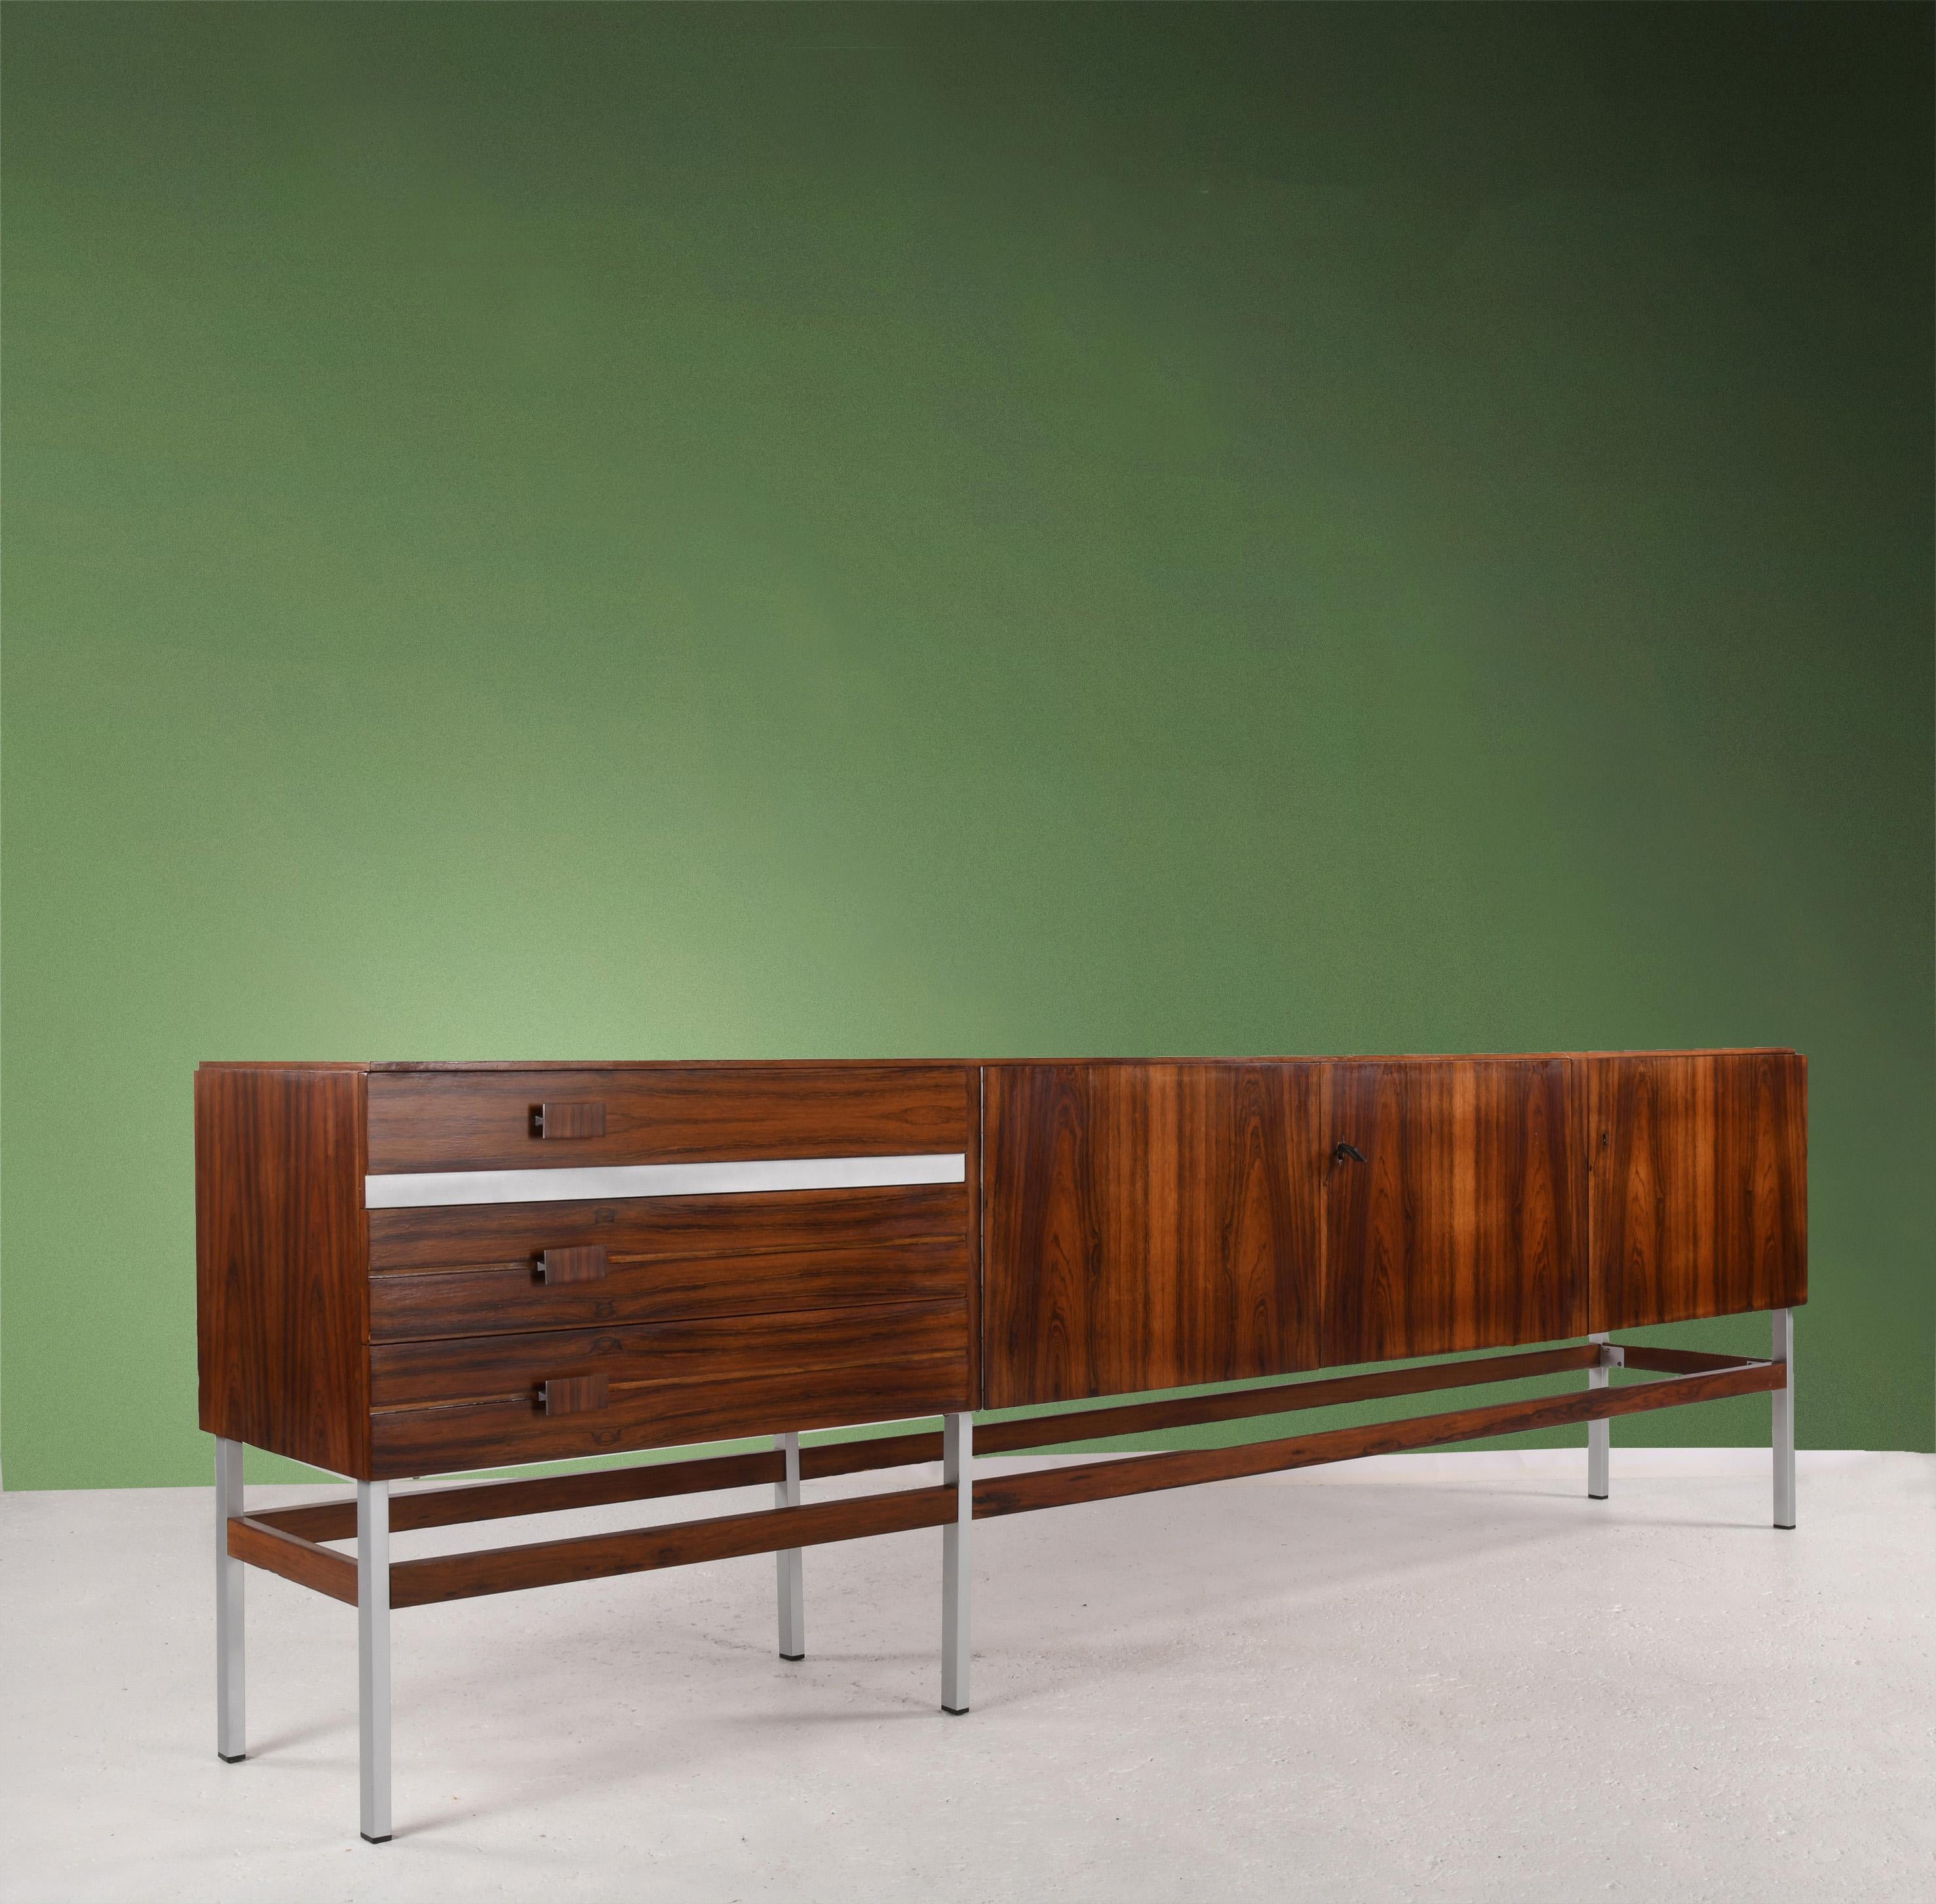 Large enfilade (W: 240 x D: 45cm H: 78cm) made in Germany in the 1960s, opening 3 doors and 3 drawers. Walnut veneer on the outside and lemon veneer on the inside. Beautifully detailed aluminium drawer handles, also veneered on the front, and drawer